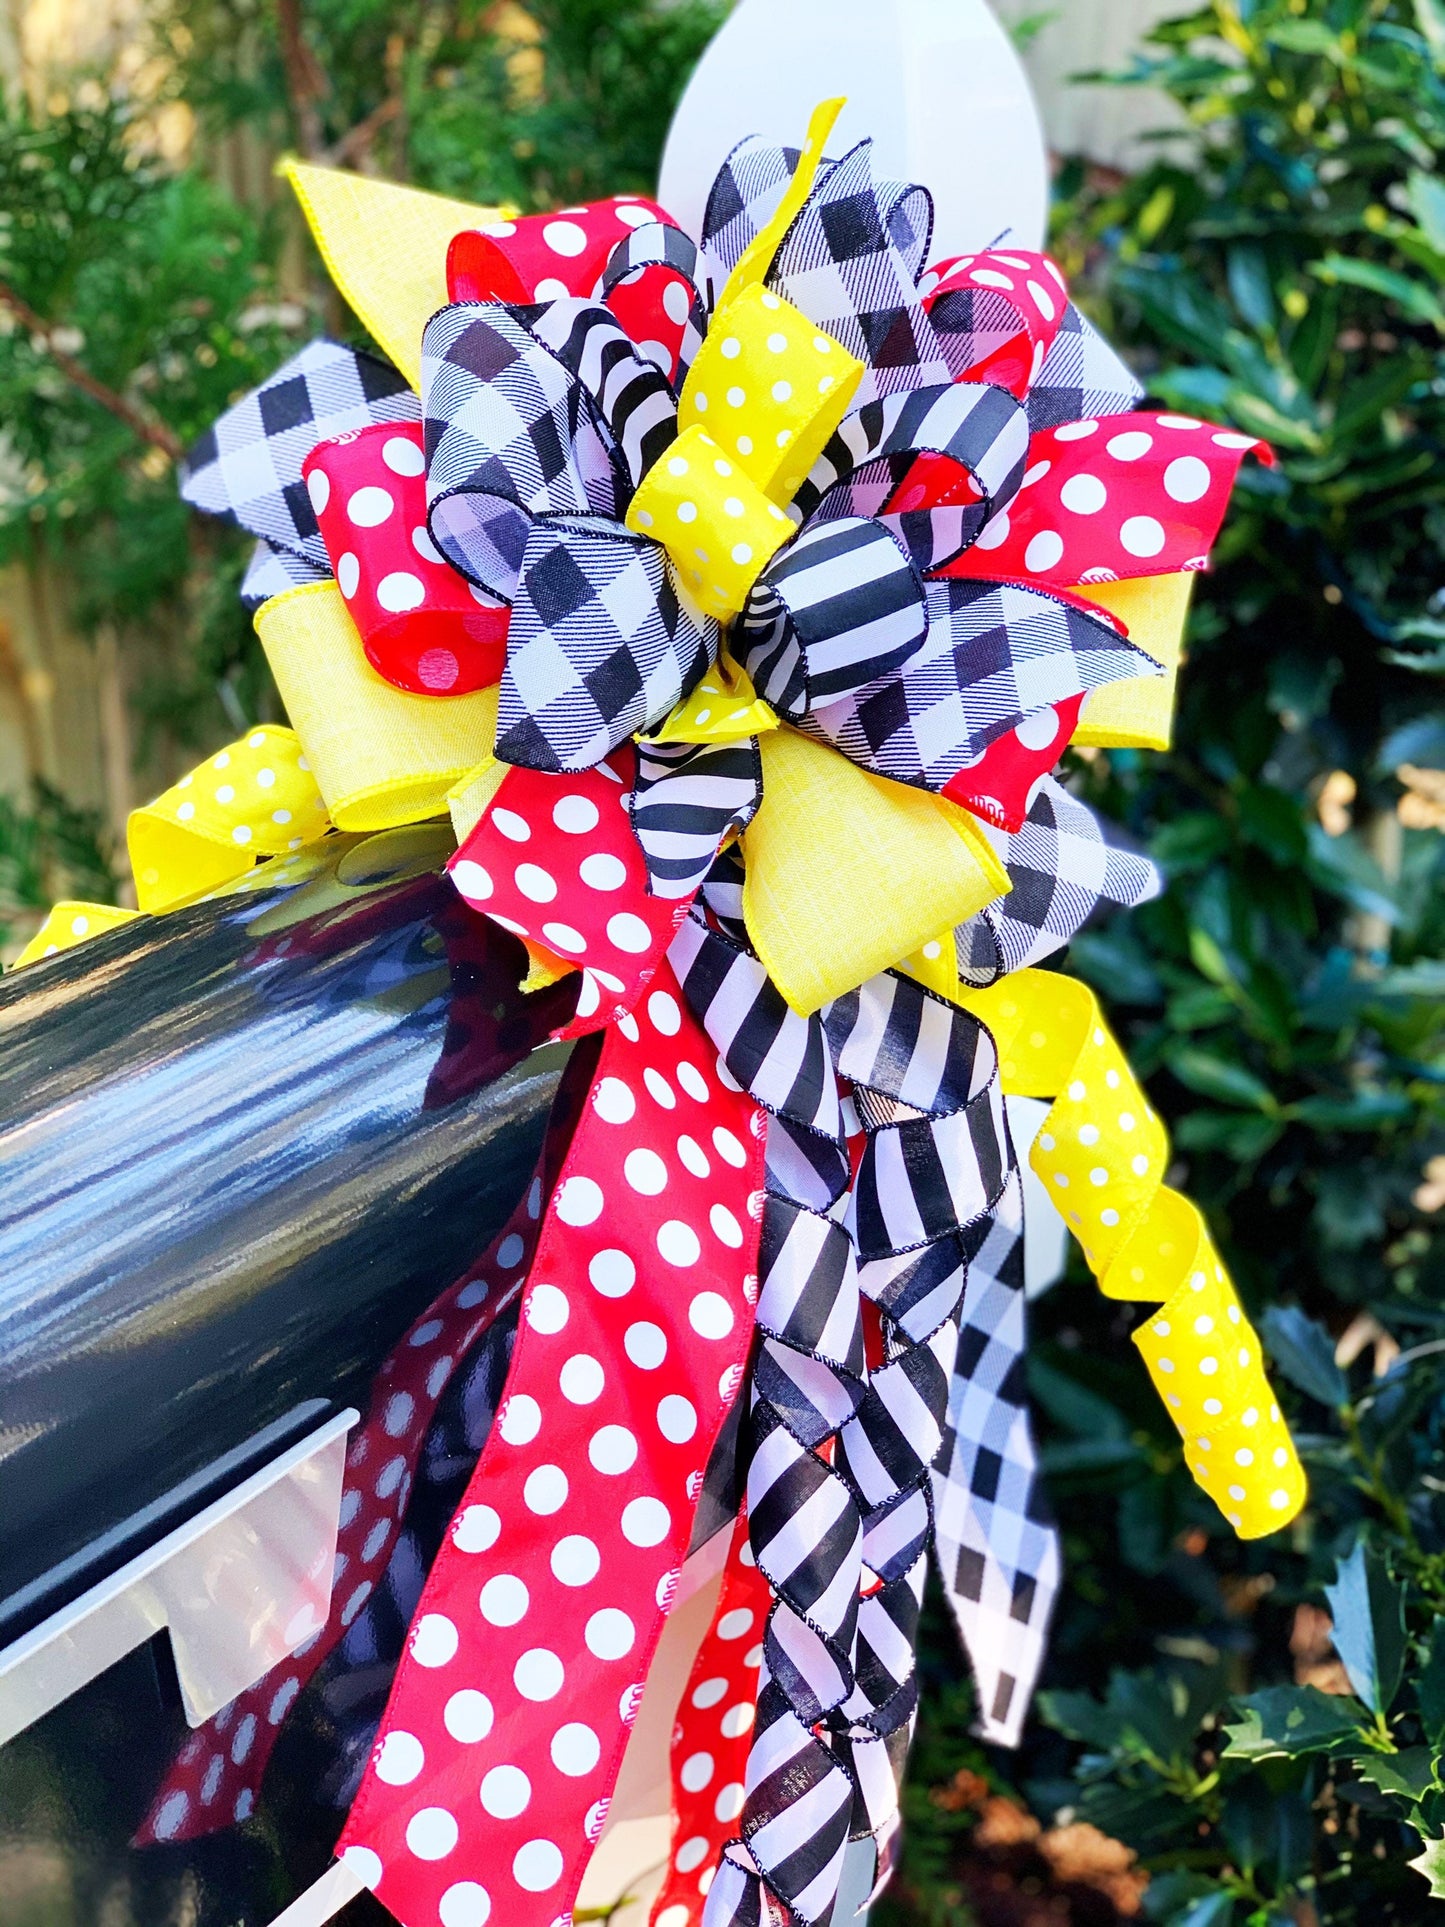 Everyday Collection - Red/Yellow/Black/White Bow, Healing Bow, Red Bow, Black Bow, Yellow Bow, Mailbox Bow, Wreath Bow, Large Bow, Bows, Bow